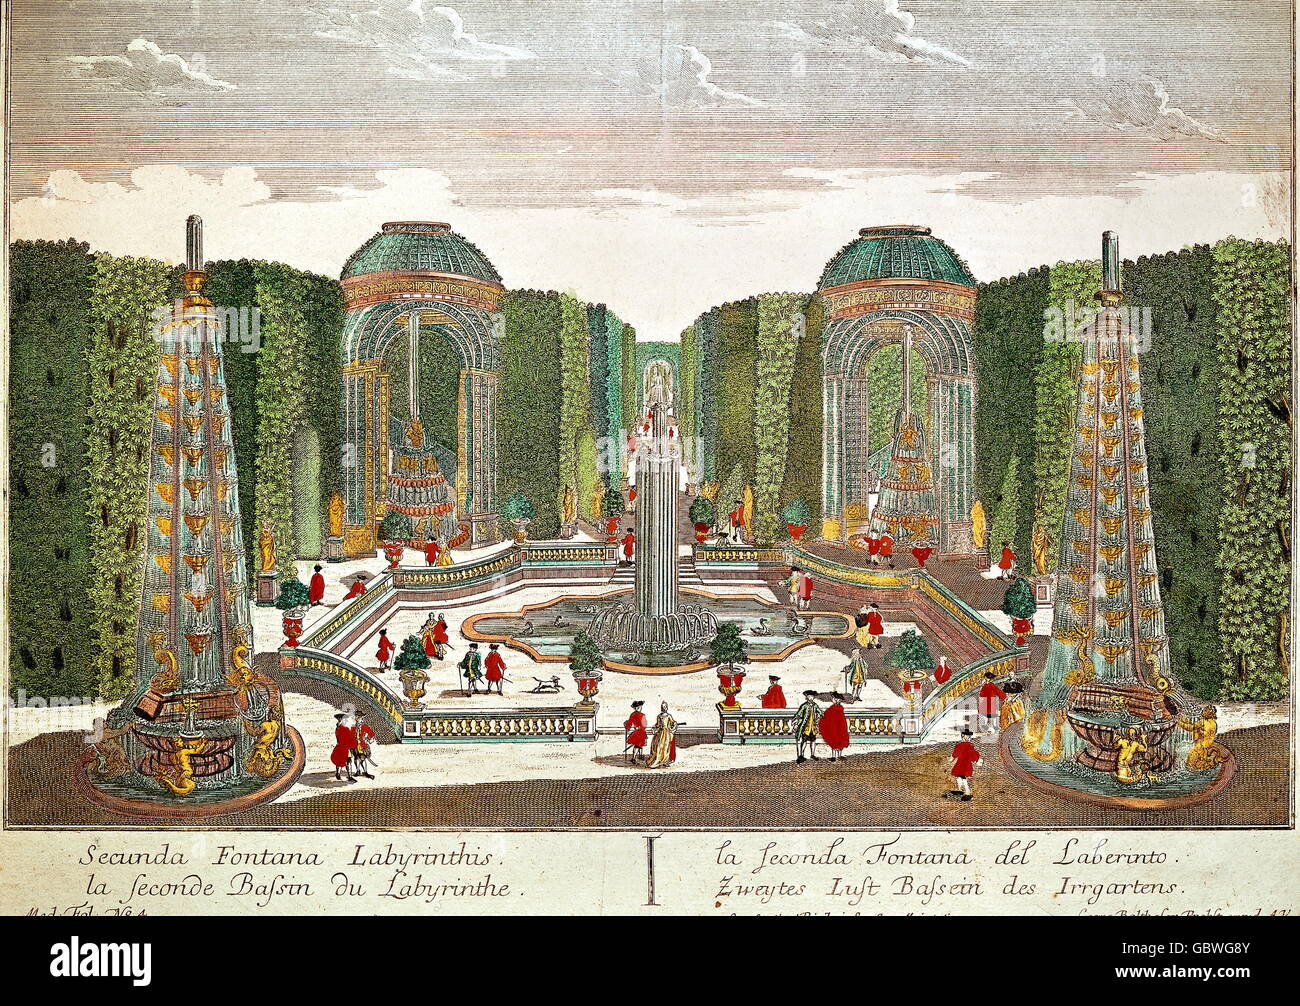 architecture, garden, garden labyrinth, zograscope picture, 27.5x42.5 centimeter, coloured copper engraving by Baltasar Probst, Augsburg, Germany, middle of the 18th century, municipal museum Munich, labyrinth, maze, mazes, labyrinth, maze, labyrinth, knot garden, mazes, labyrinths, knot gardens, landscaping, park, parks, rococo, fountain, fountains, strolling, walk, walking, promenading, stroll, court society, garden, gardens, hedge, hedges, pavilion, pavilions, landscaping, garden, gardens, coloured, colored, historic, historical, people, Additional-Rights-Clearences-Not Available Stock Photo